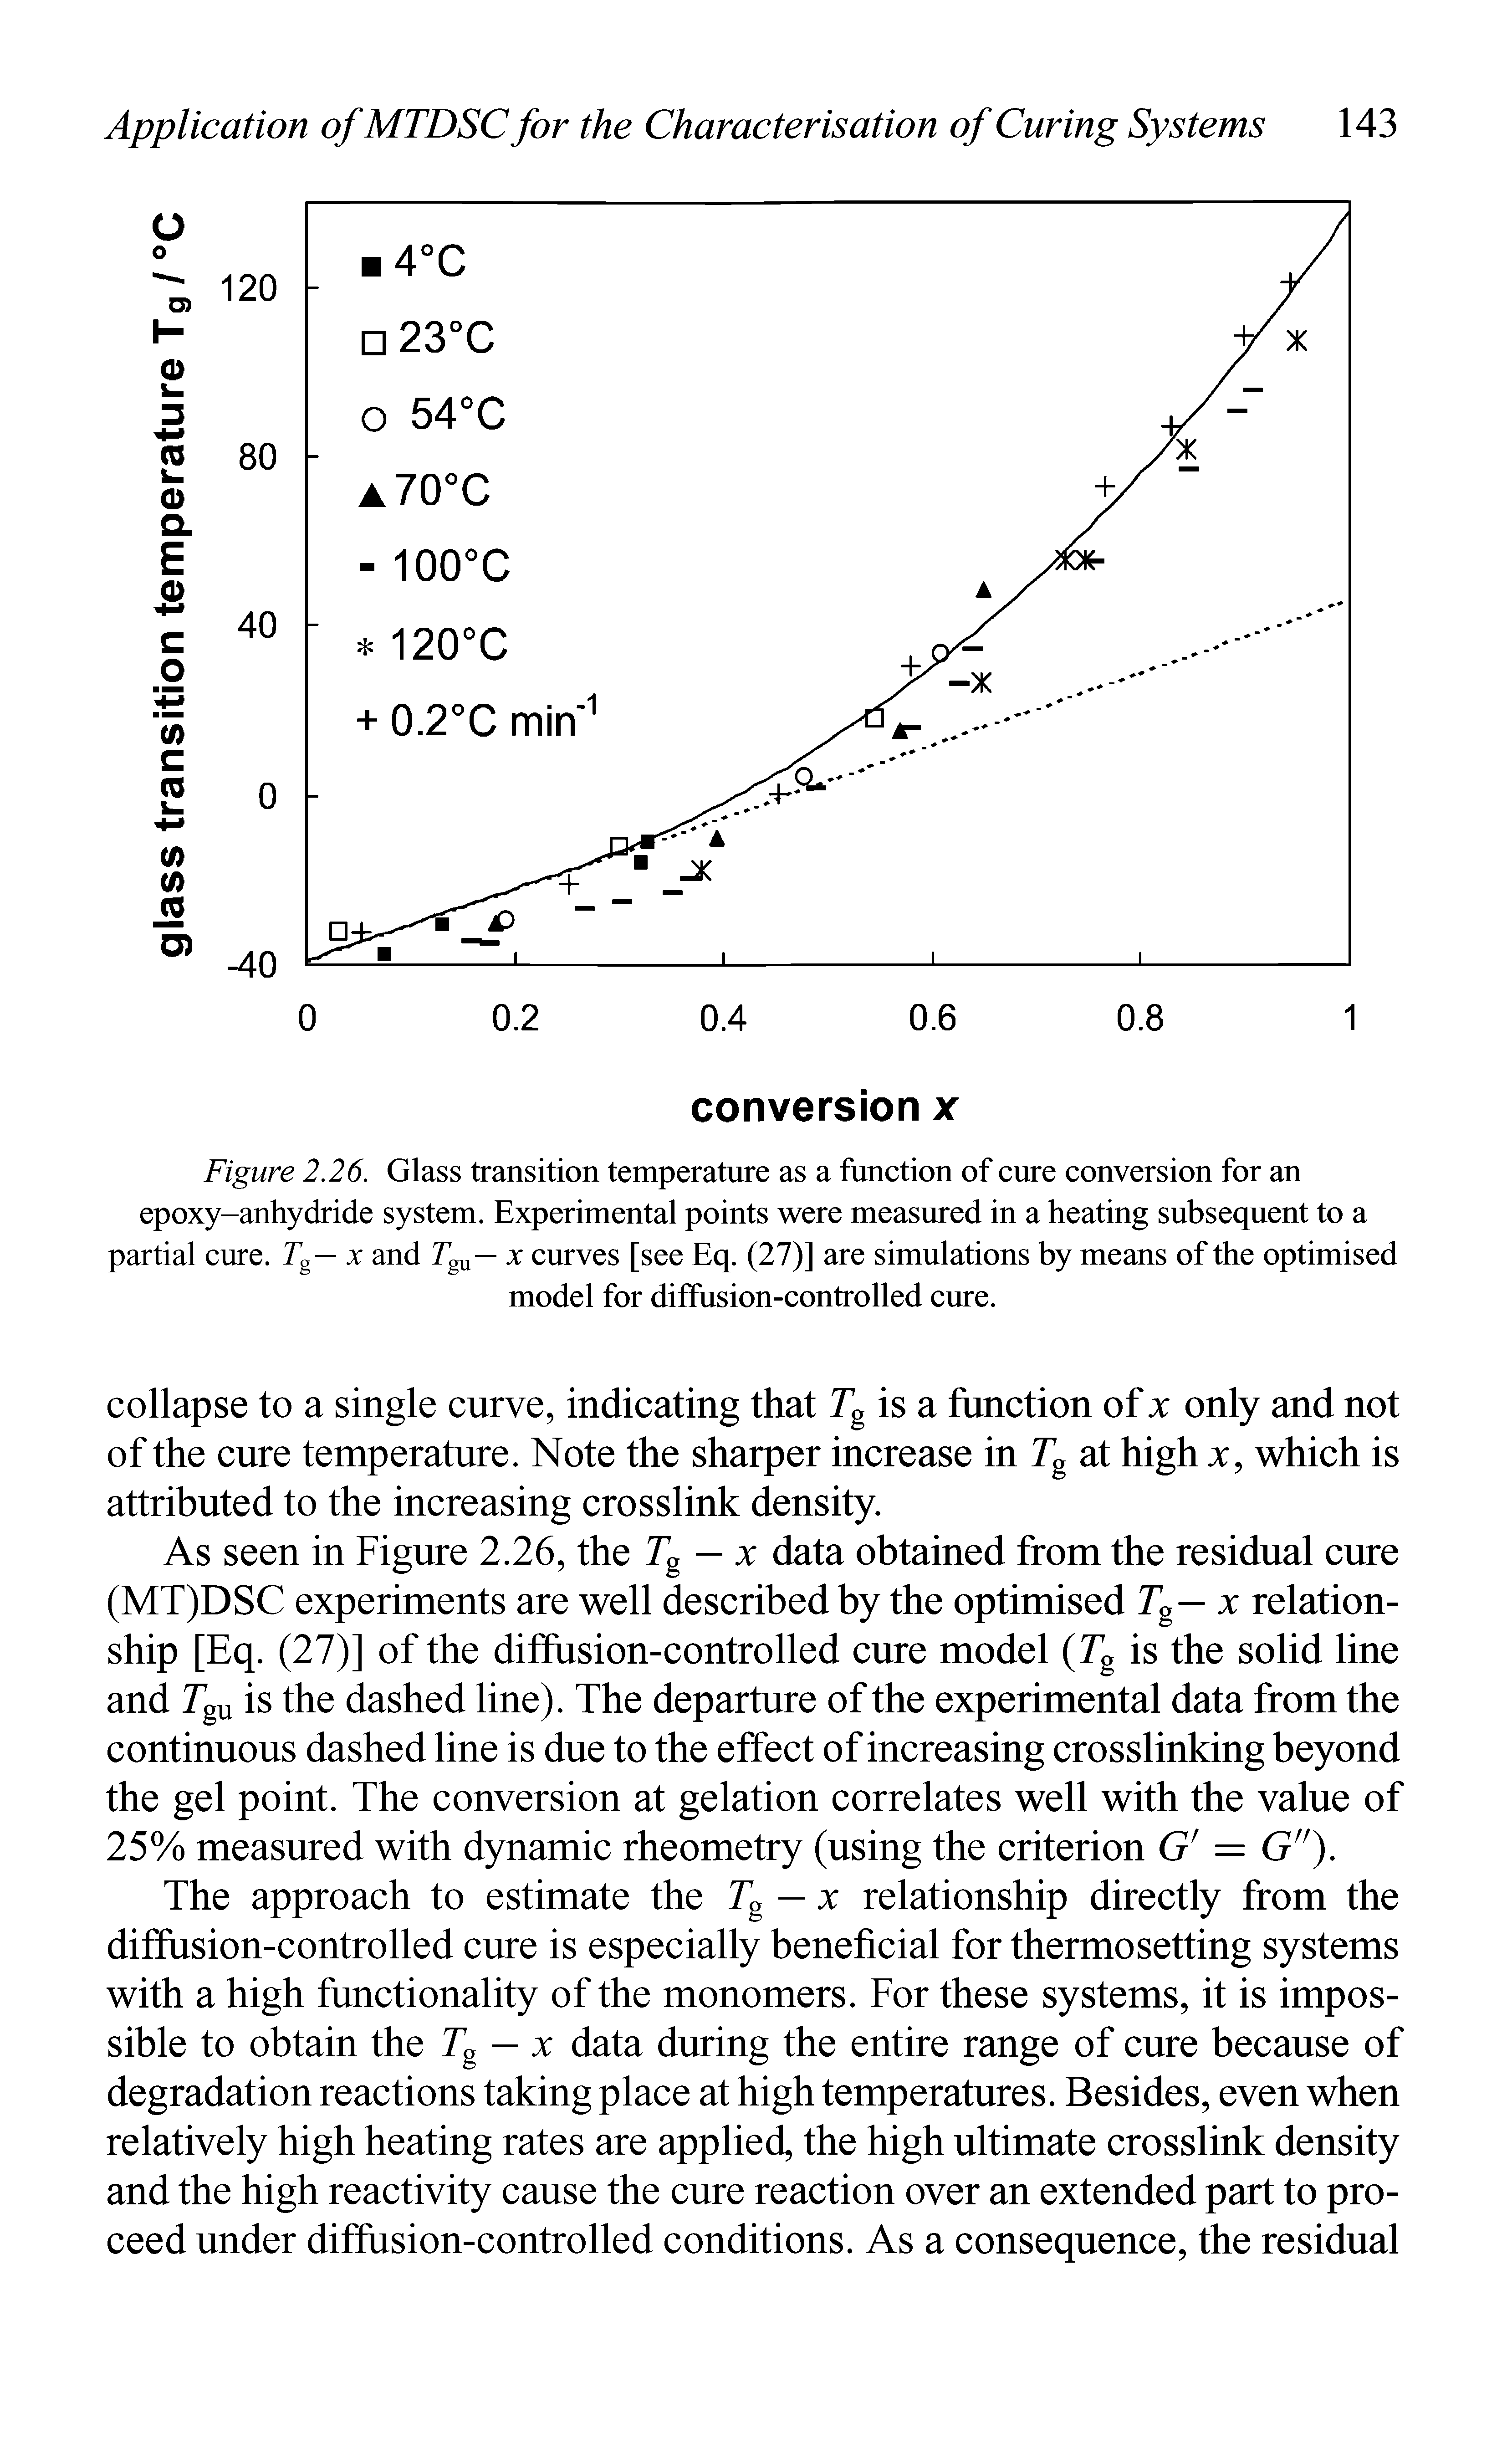 Figure 2.26. Glass transition temperature as a function of cure conversion for an epoxy-anhydride system. Experimental points were measured in a heating subsequent to a partial cure. T — x and T — x curves [see Eq. (27)] are simulations by means of the optimised model for diffusion-controlled cure.